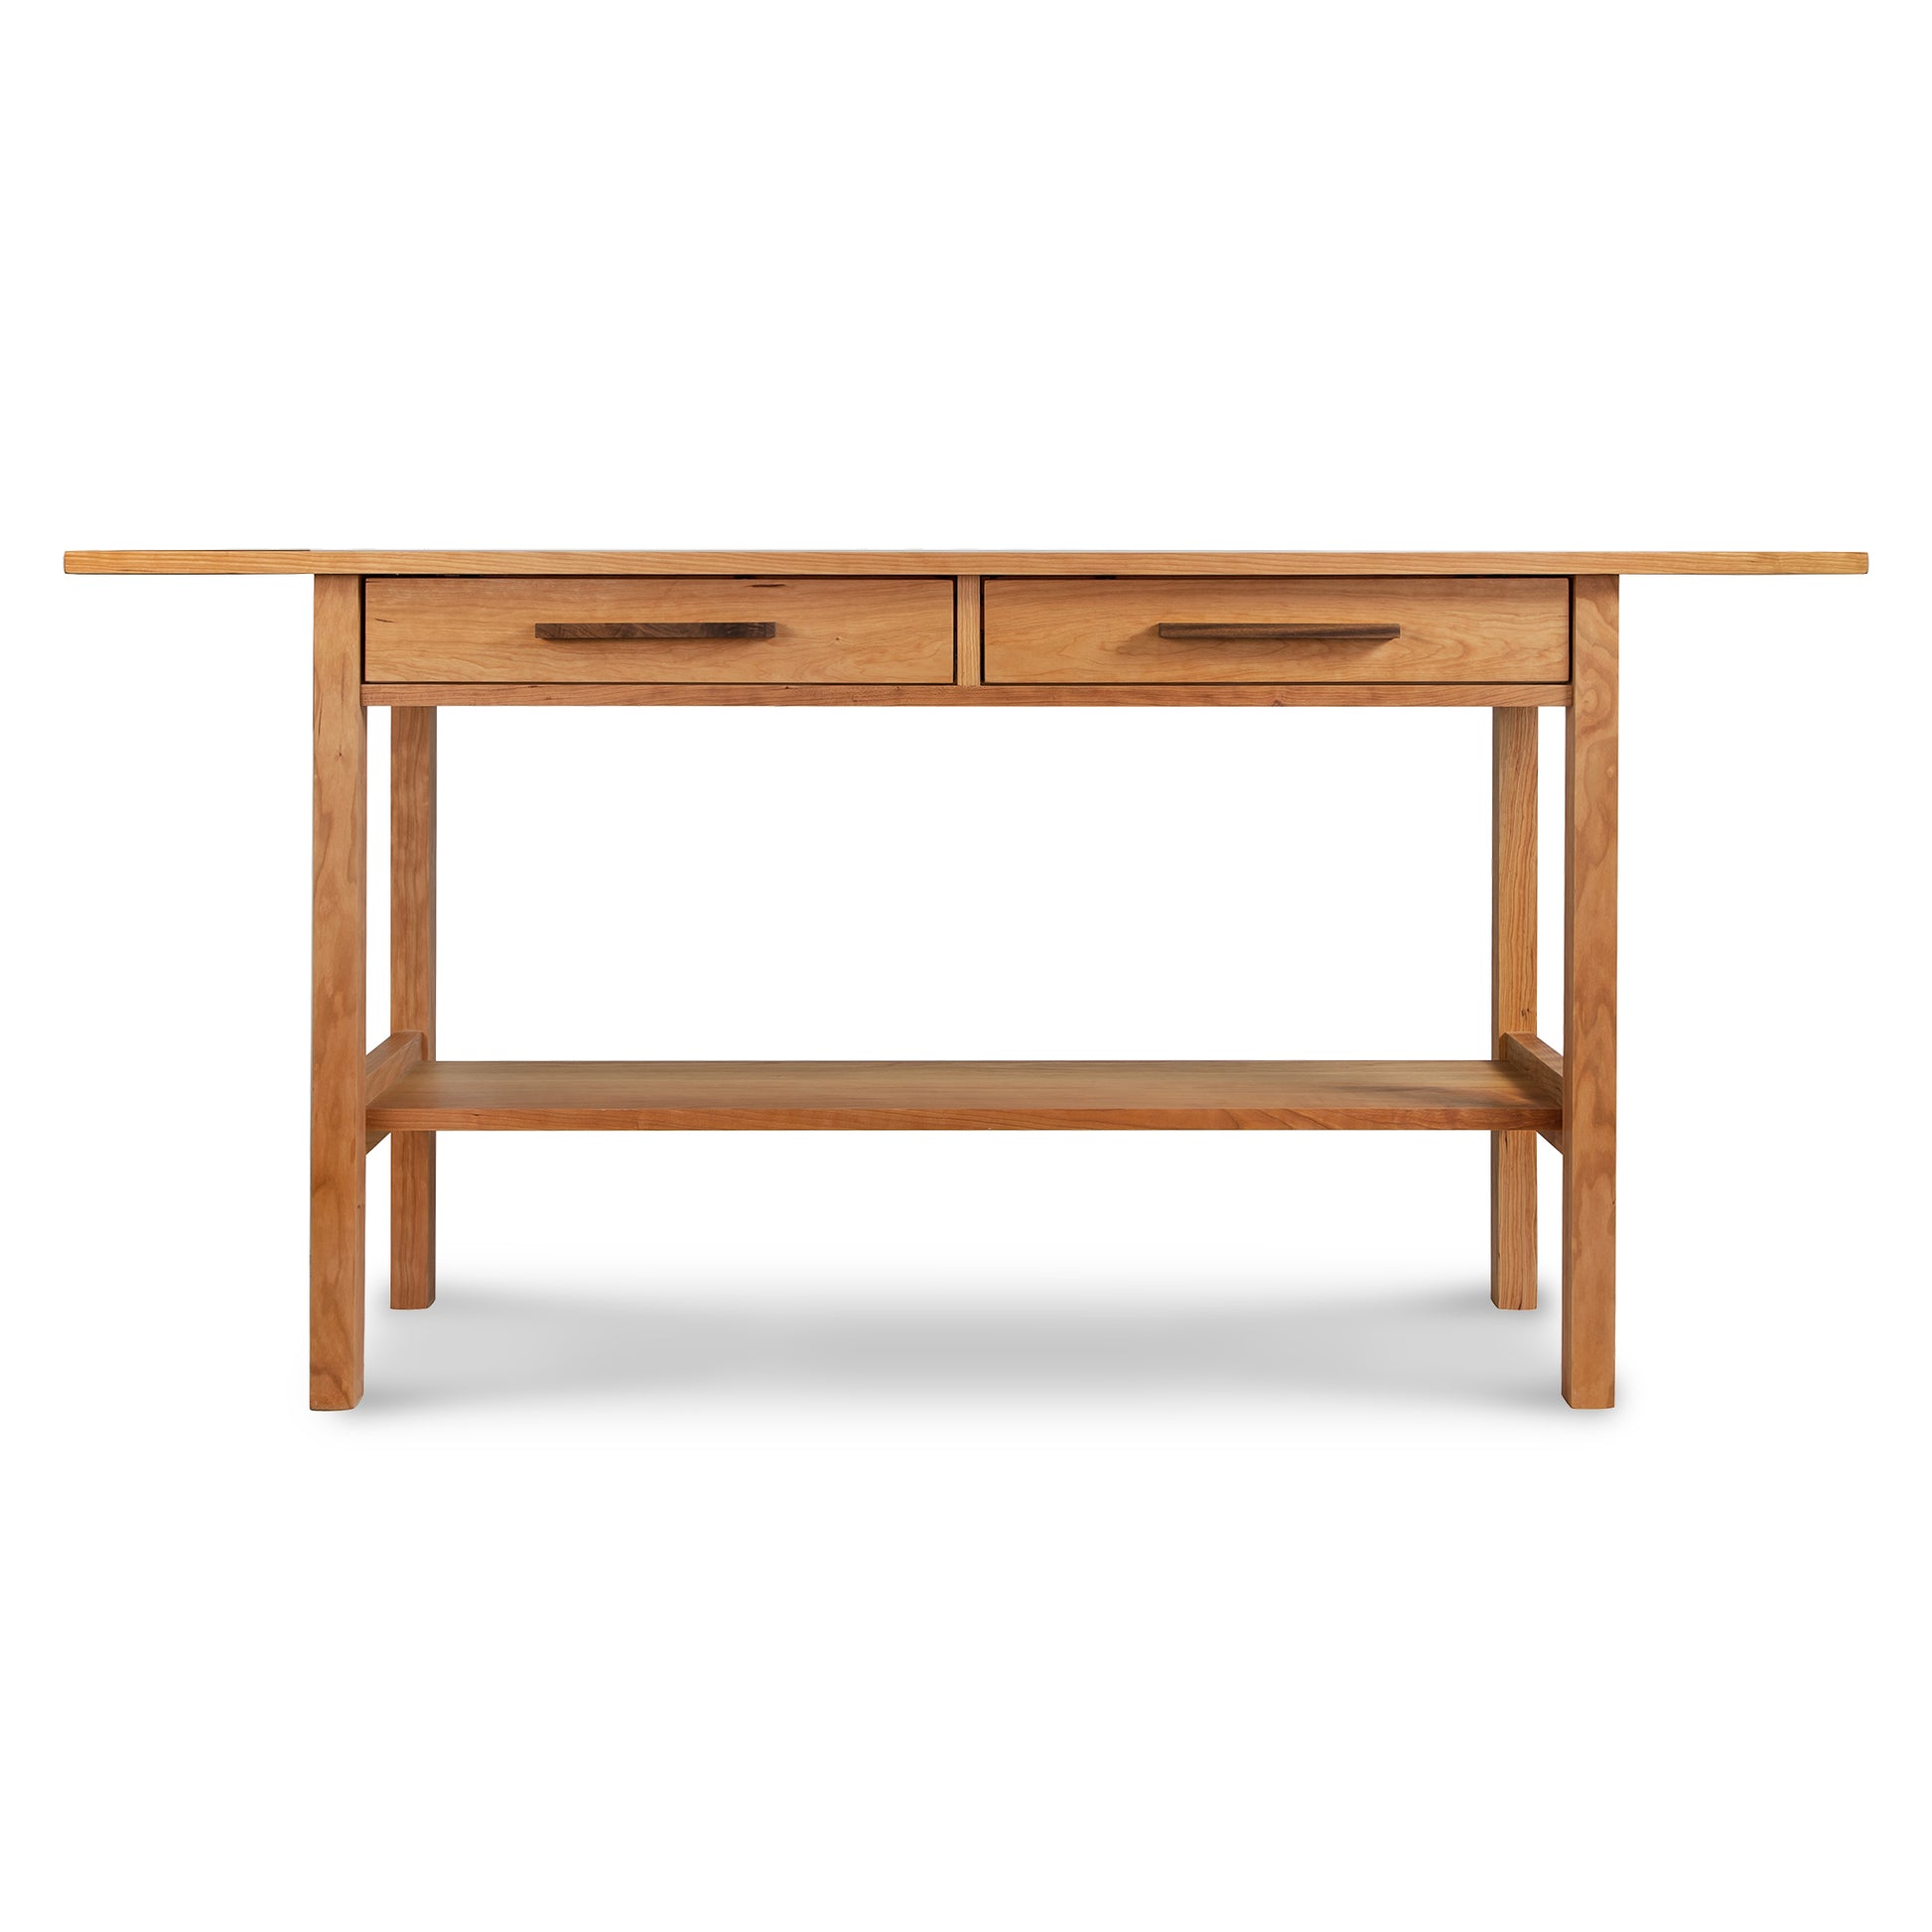 A Vermont Furniture Designs Modern Craftsman 2-Drawer Console Table with solid wood construction featuring two drawers and a shelf.